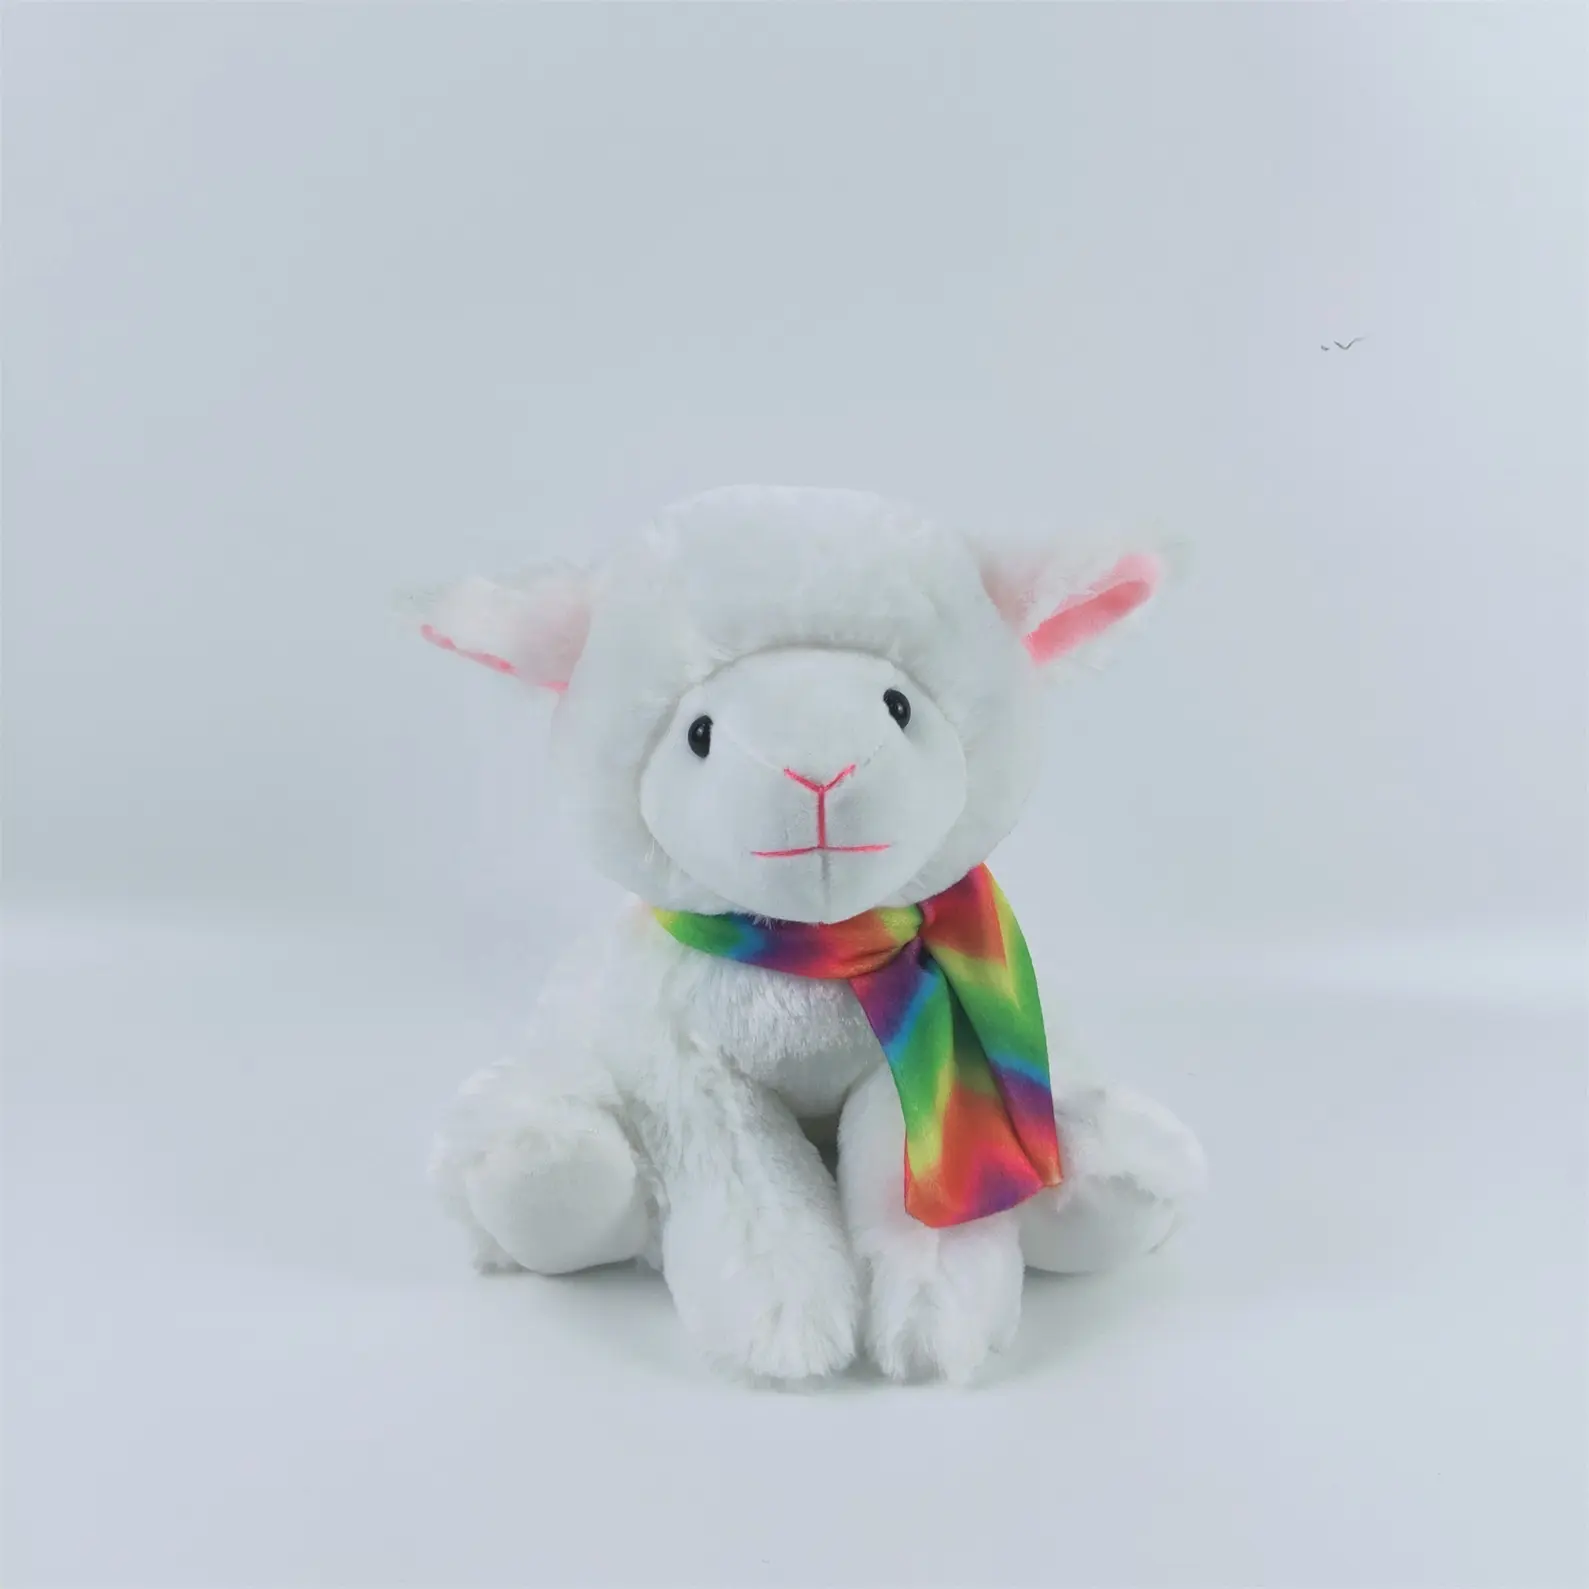 Festival animal toy plush white sheep toy for Easter soft stuffed cute lamb with colorful scarf